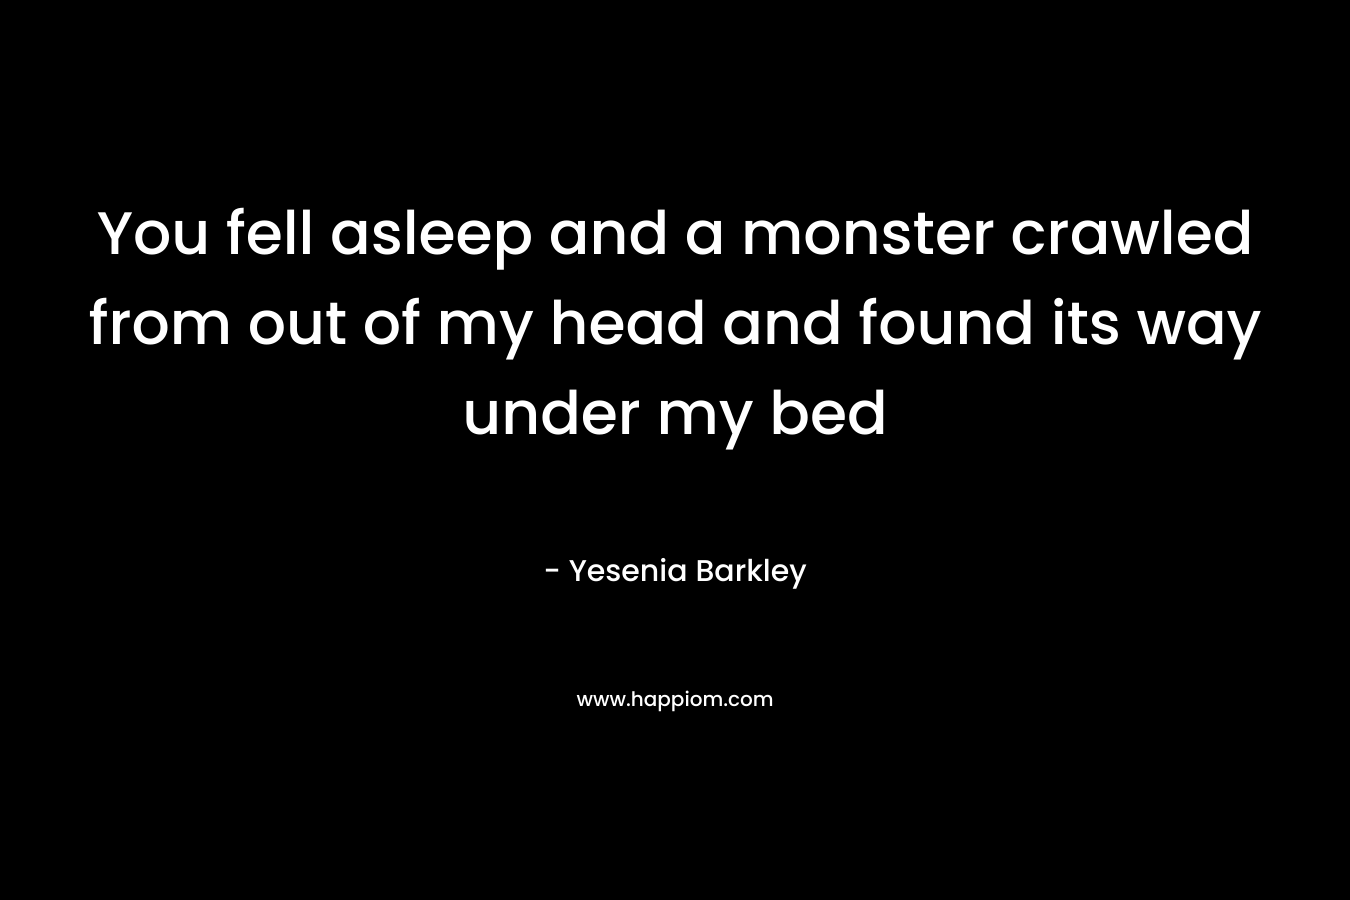 You fell asleep and a monster crawled from out of my head and found its way under my bed